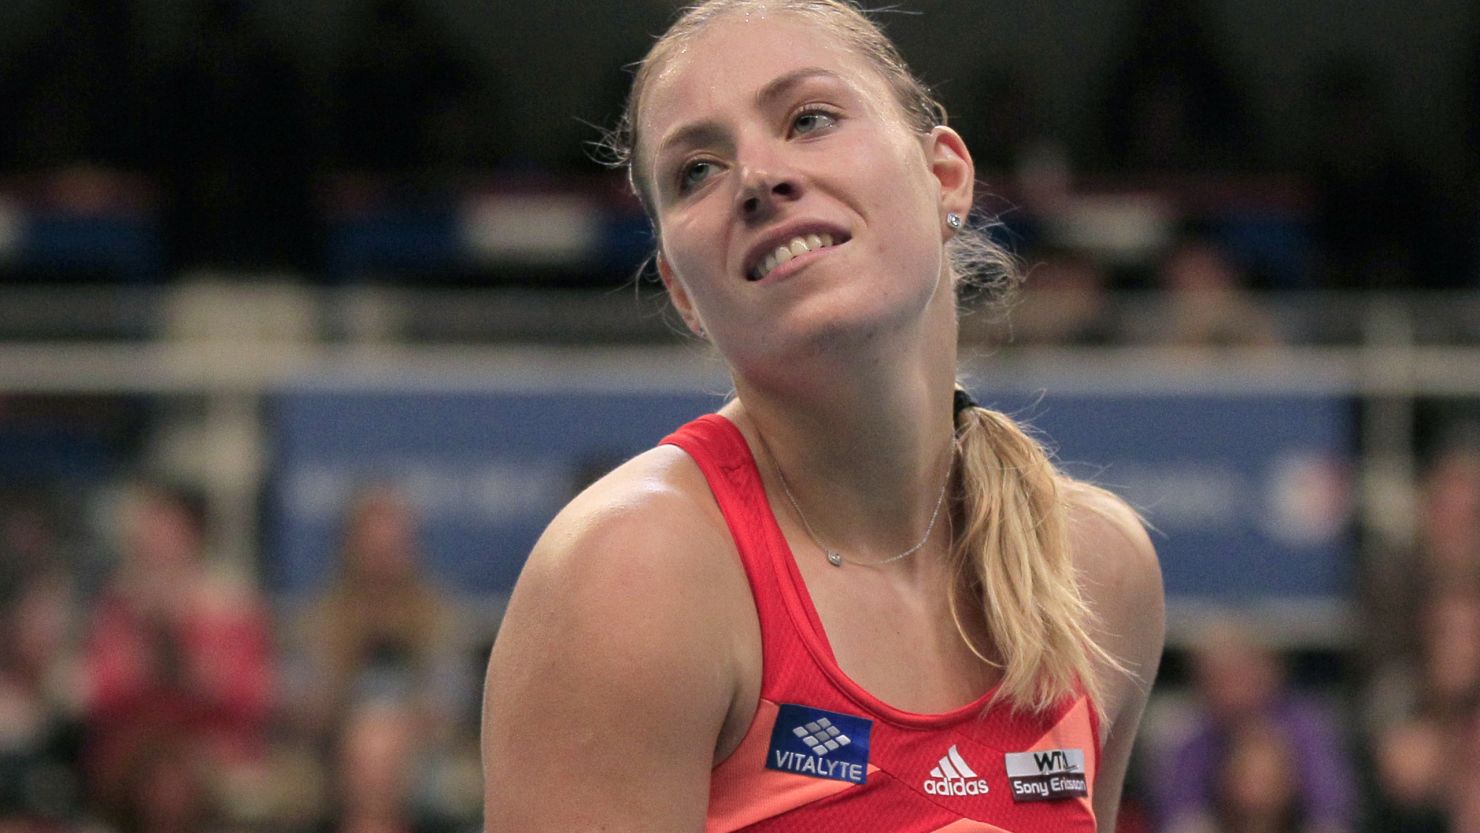 Angelique Kerber had reasons to be cheerful after a stunning victory over Marian Bartoli in the Paris final.